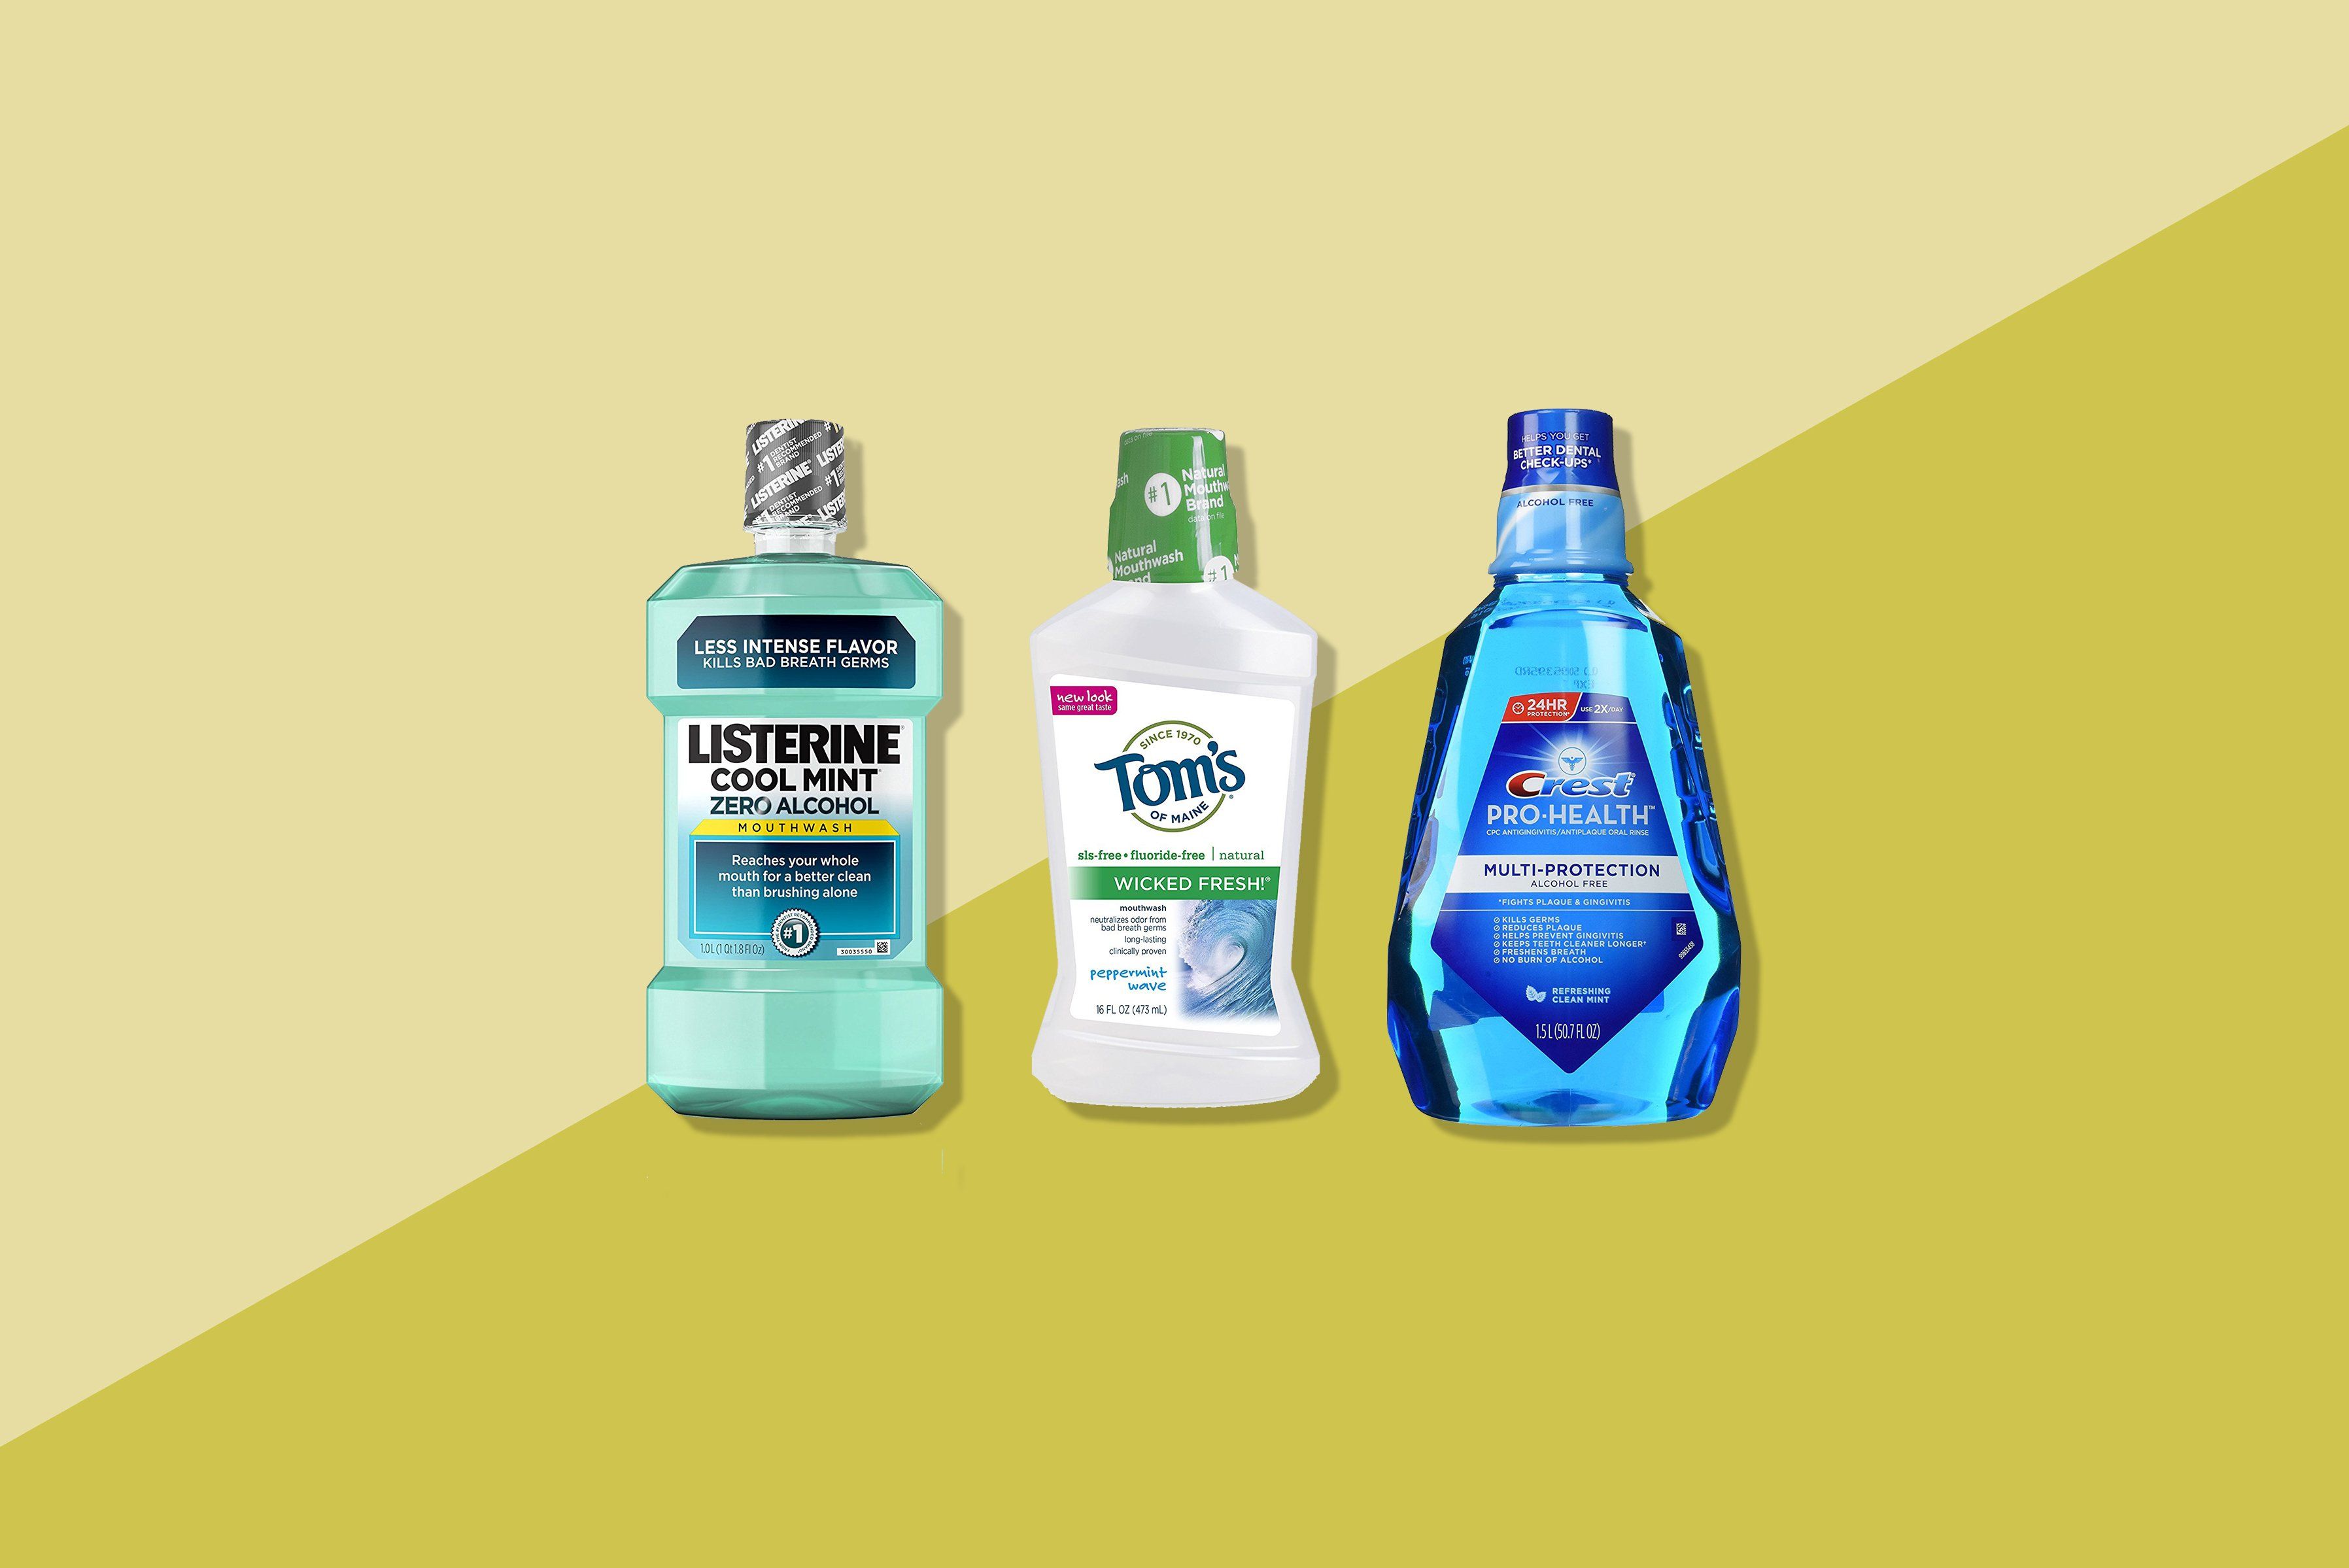 Wild R. recommendet and oral sex Listerine